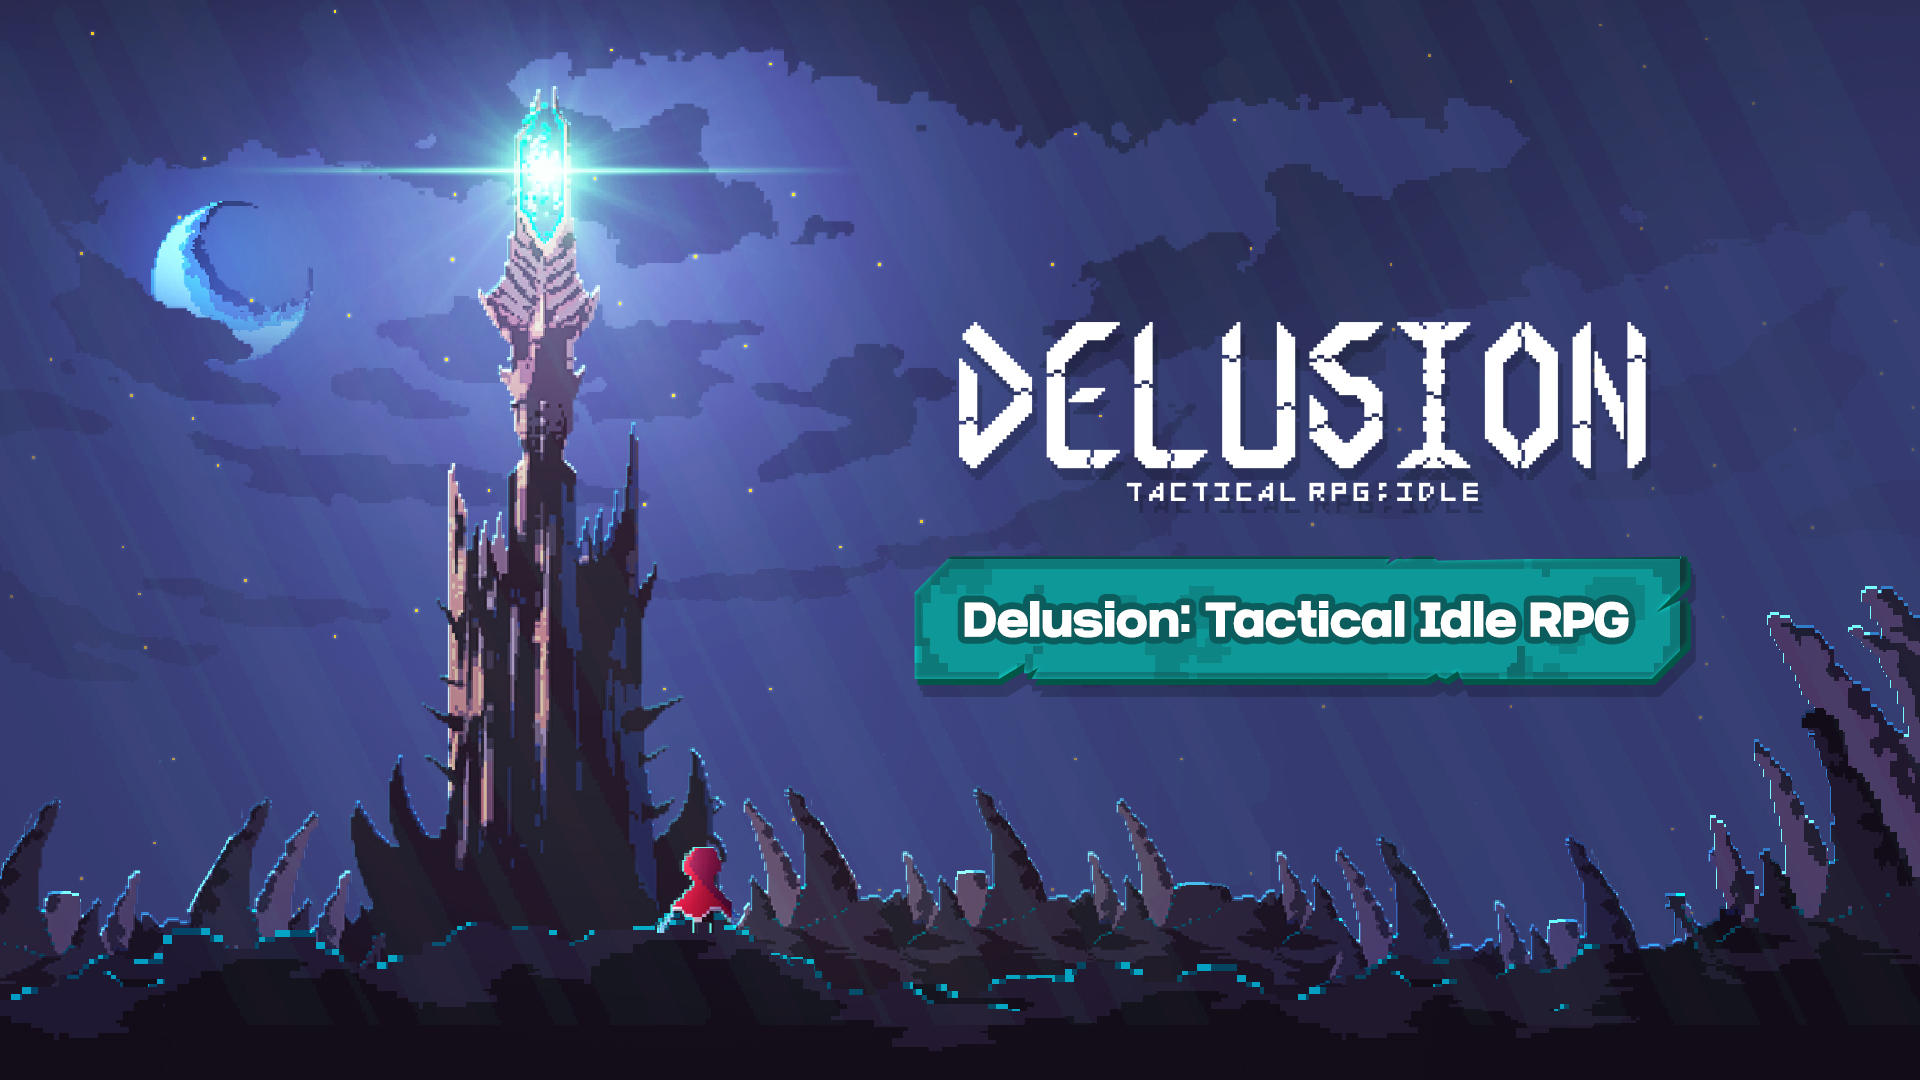 Delusion: Tactical Idle RPG screenshot game